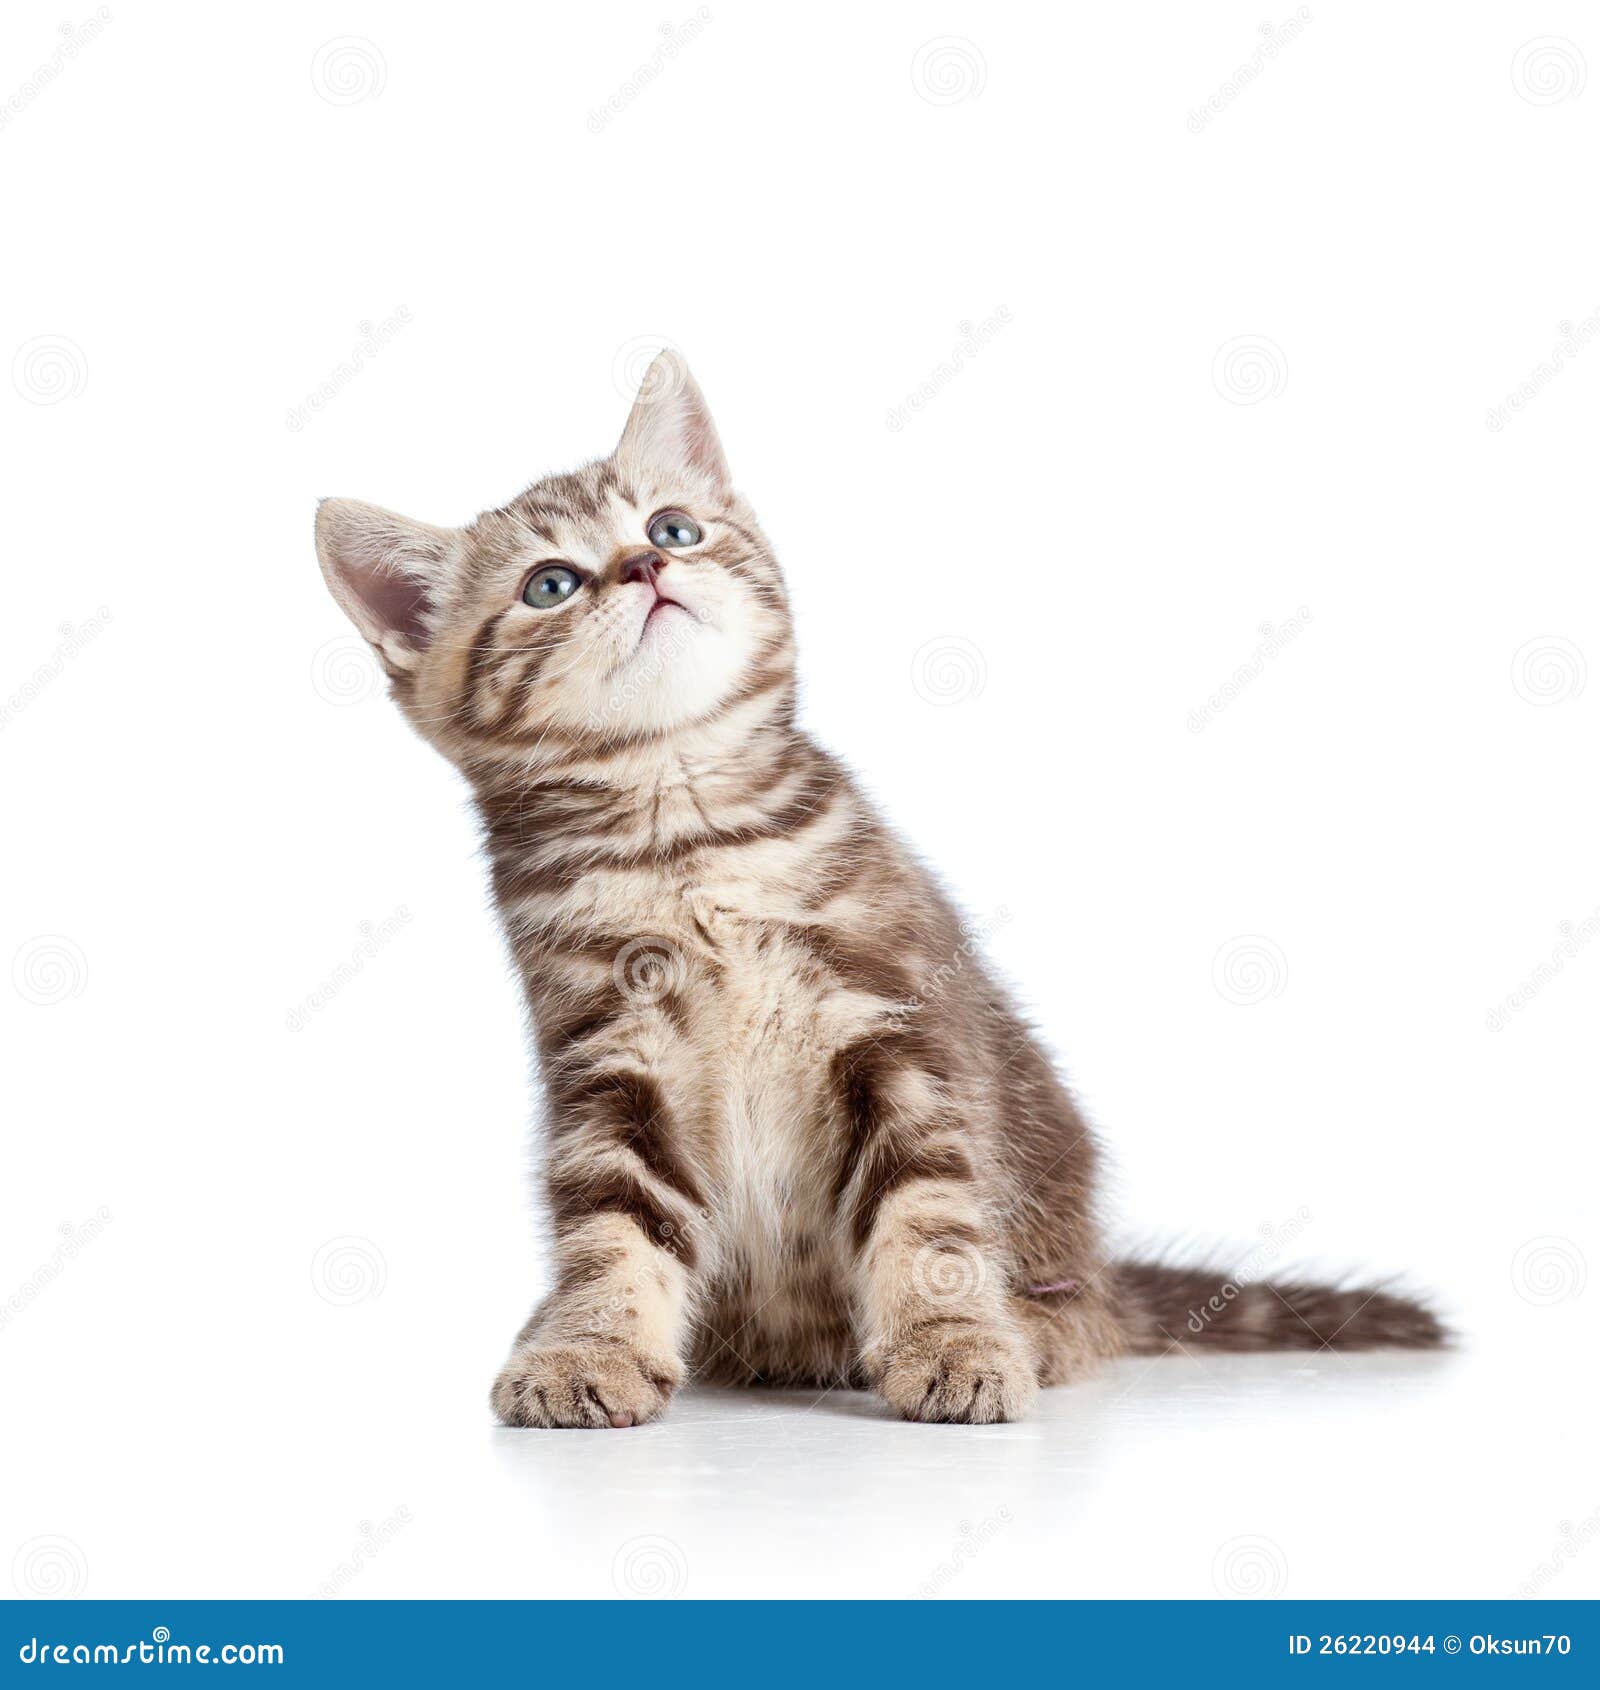 charming cat kitten looking up 26220944